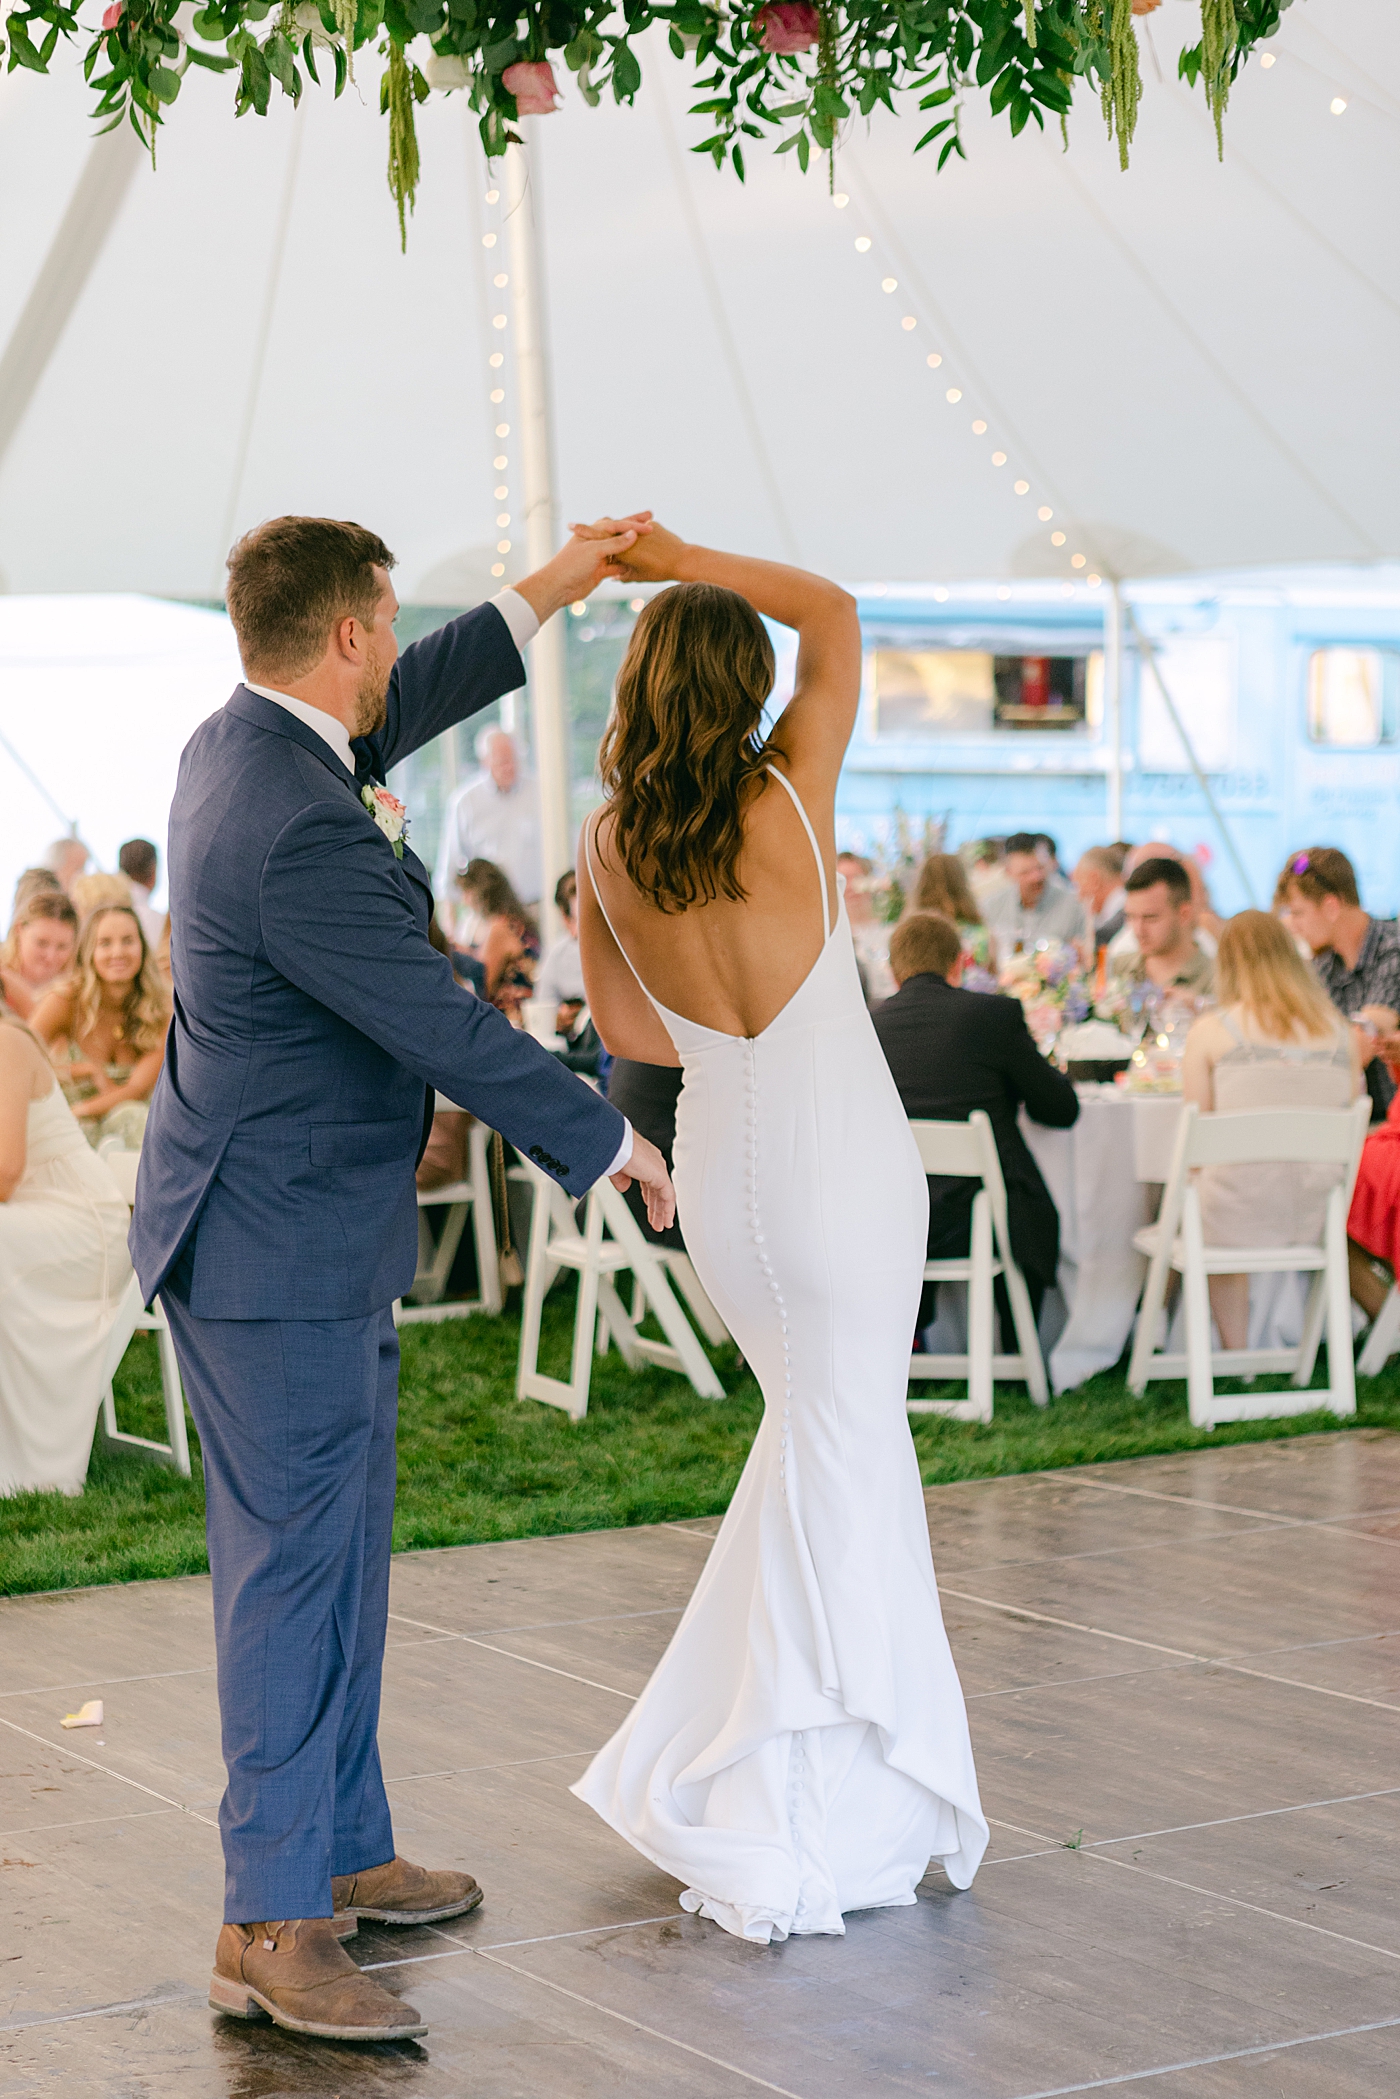 Bride and groom first dance | Image by Hope Helmuth Photography